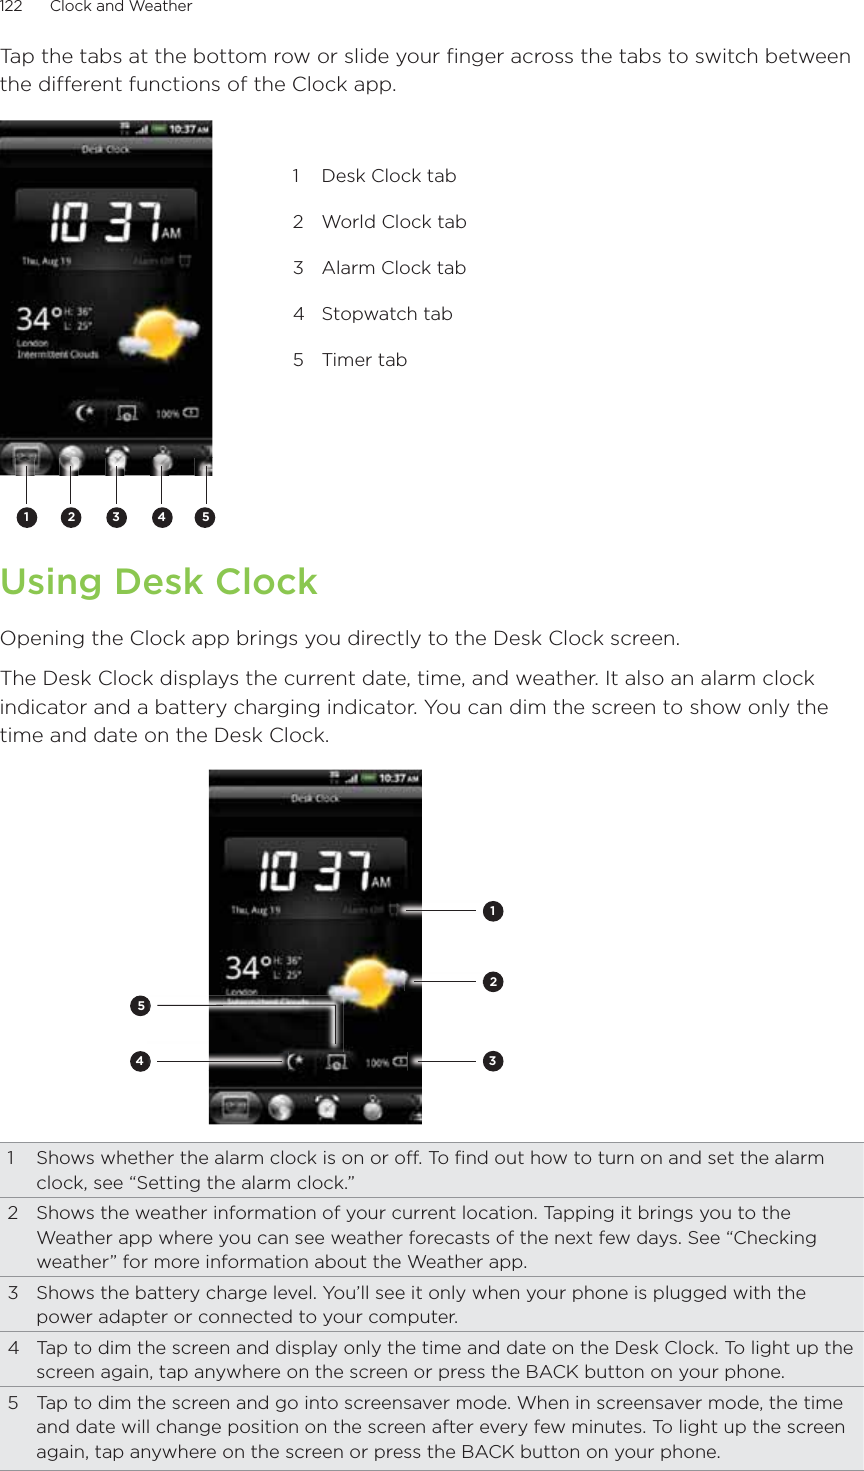 122      Clock and Weather      Tap the tabs at the bottom row or slide your finger across the tabs to switch between the different functions of the Clock app.2 3 4511  Desk Clock tab2  World Clock tab3  Alarm Clock tab4 Stopwatch tab5 Timer tabUsing Desk ClockOpening the Clock app brings you directly to the Desk Clock screen.The Desk Clock displays the current date, time, and weather. It also an alarm clock indicator and a battery charging indicator. You can dim the screen to show only the time and date on the Desk Clock.234511  Shows whether the alarm clock is on or off. To find out how to turn on and set the alarm clock, see “Setting the alarm clock.”2  Shows the weather information of your current location. Tapping it brings you to the Weather app where you can see weather forecasts of the next few days. See “Checking weather” for more information about the Weather app.3  Shows the battery charge level. You’ll see it only when your phone is plugged with the power adapter or connected to your computer.4  Tap to dim the screen and display only the time and date on the Desk Clock. To light up the screen again, tap anywhere on the screen or press the BACK button on your phone.5  Tap to dim the screen and go into screensaver mode. When in screensaver mode, the time and date will change position on the screen after every few minutes. To light up the screen again, tap anywhere on the screen or press the BACK button on your phone.